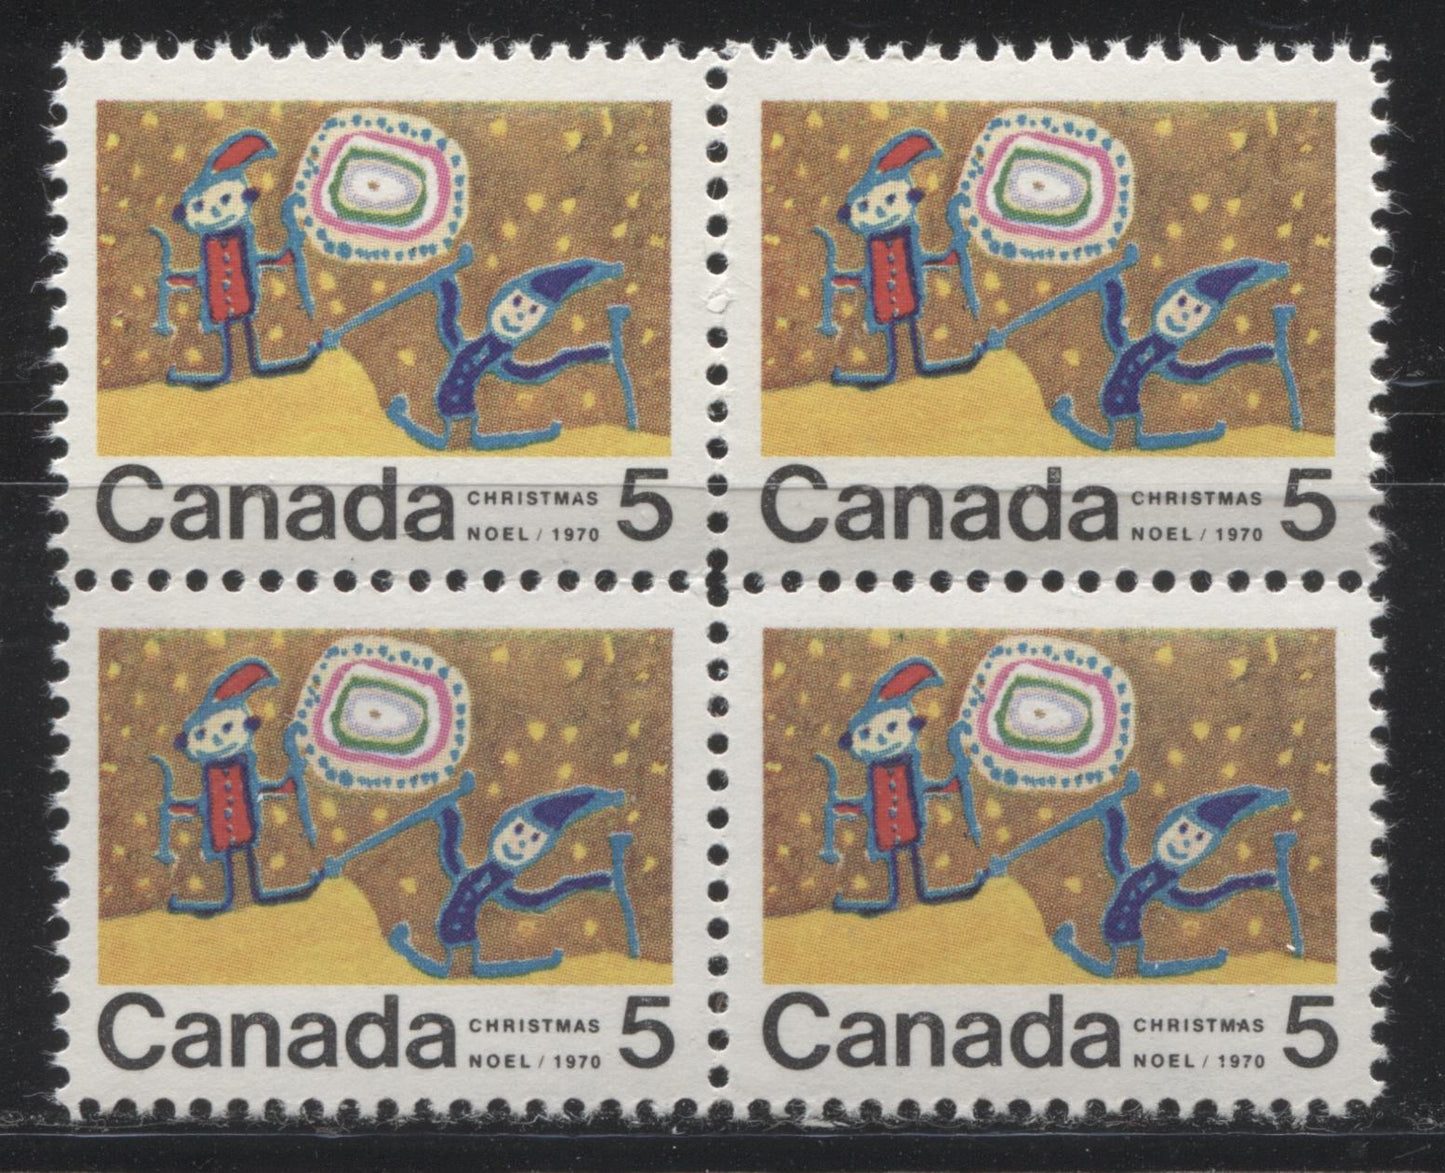 Lot 115 Canada #522i 5c Multicoloured Children Skiing, 1970 Christmas Issue, a VFNH Centre Block of 4 on HB10 Ribbed Paper, With Dot Between "MA" of "Christmas" on LR Stamp, Perf. 11.95 x 11.9